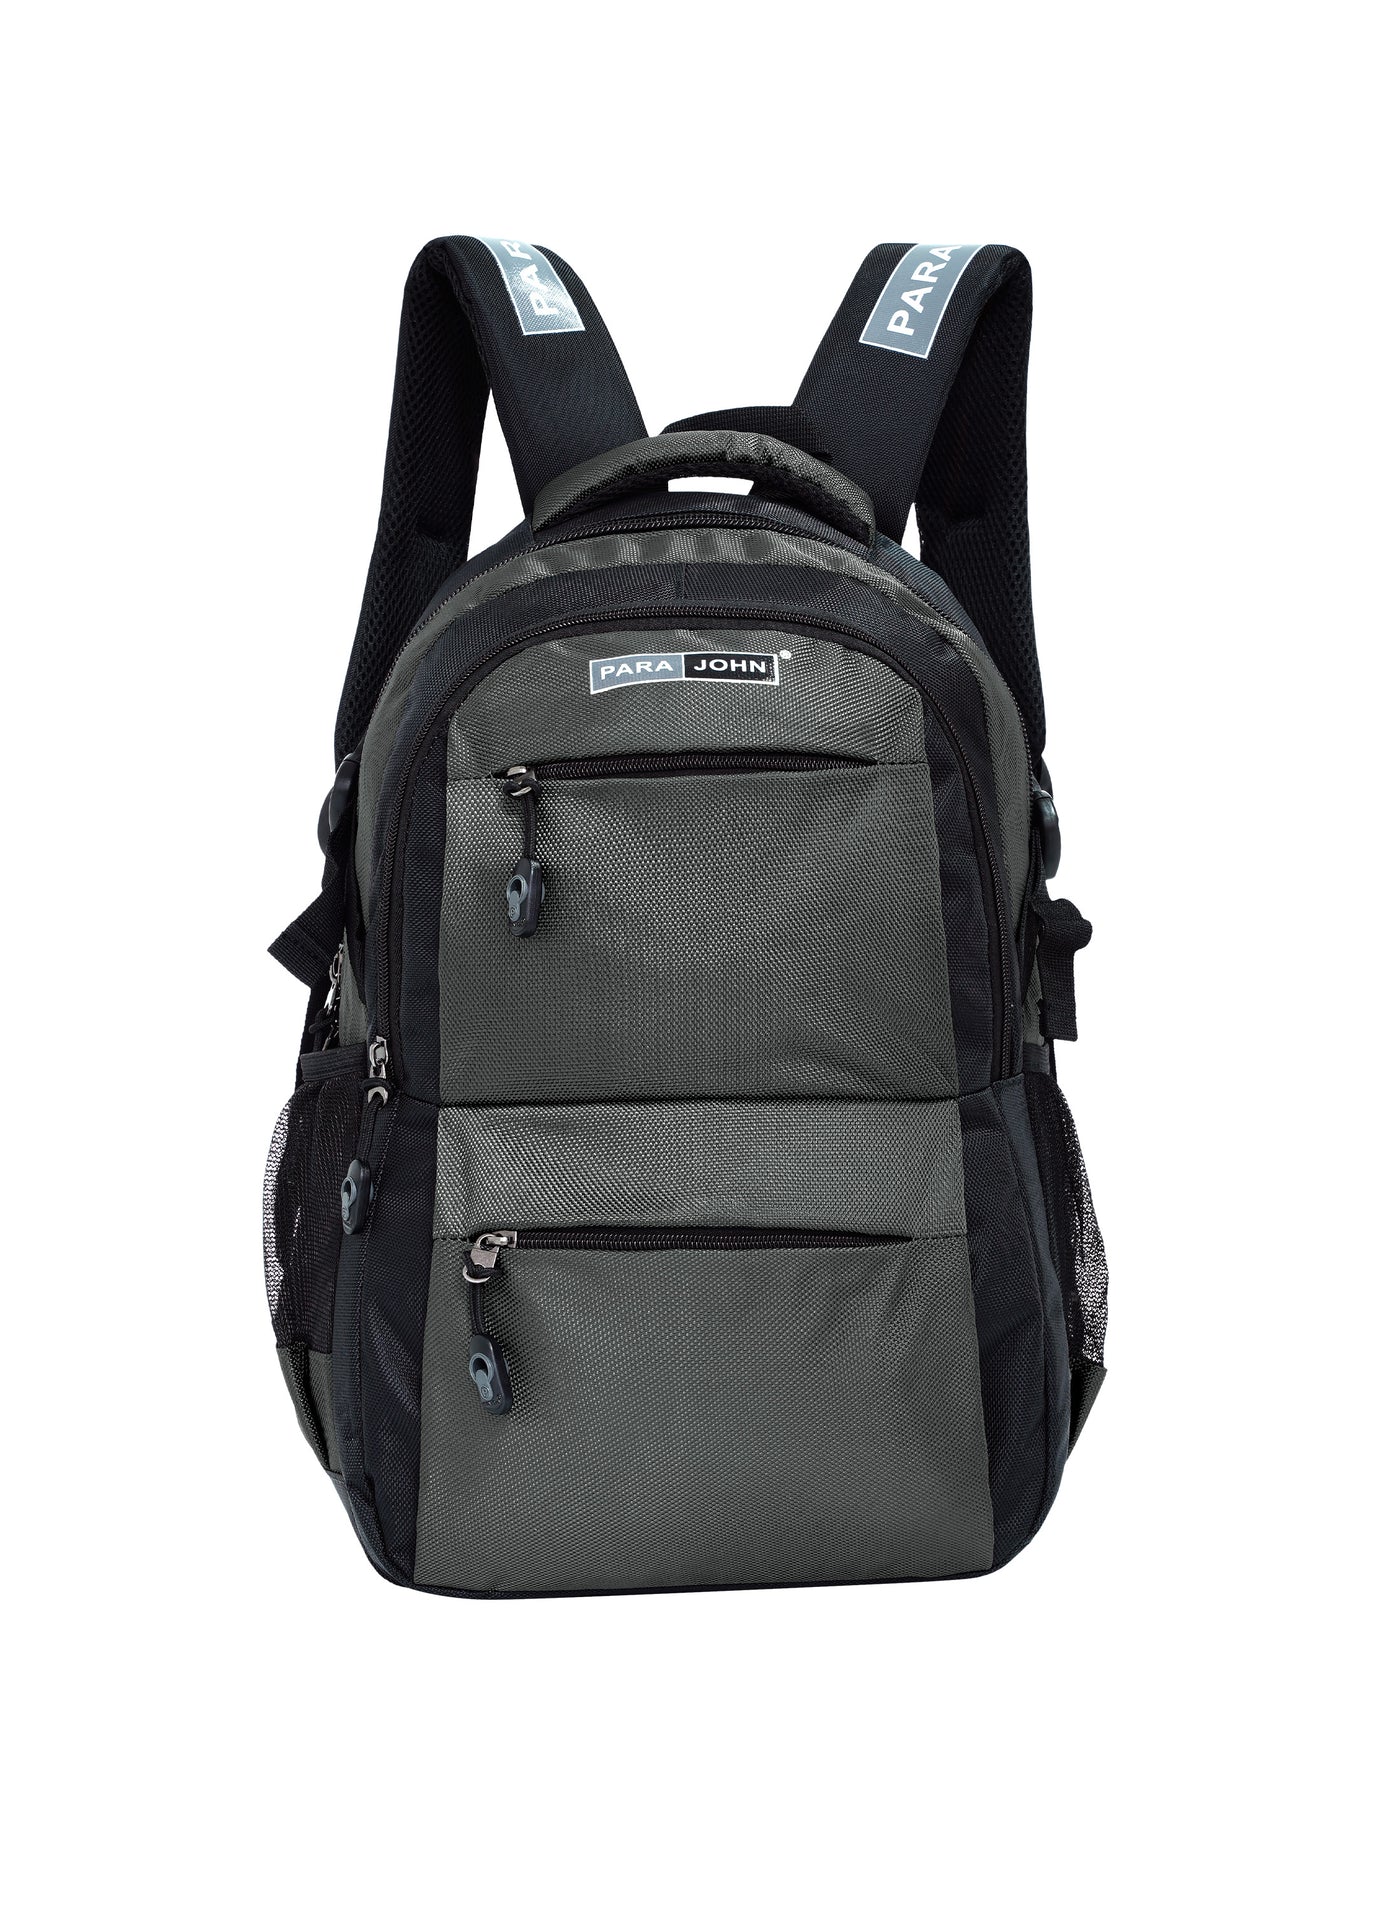 Classic Students School Backpack Grey 18 Inch